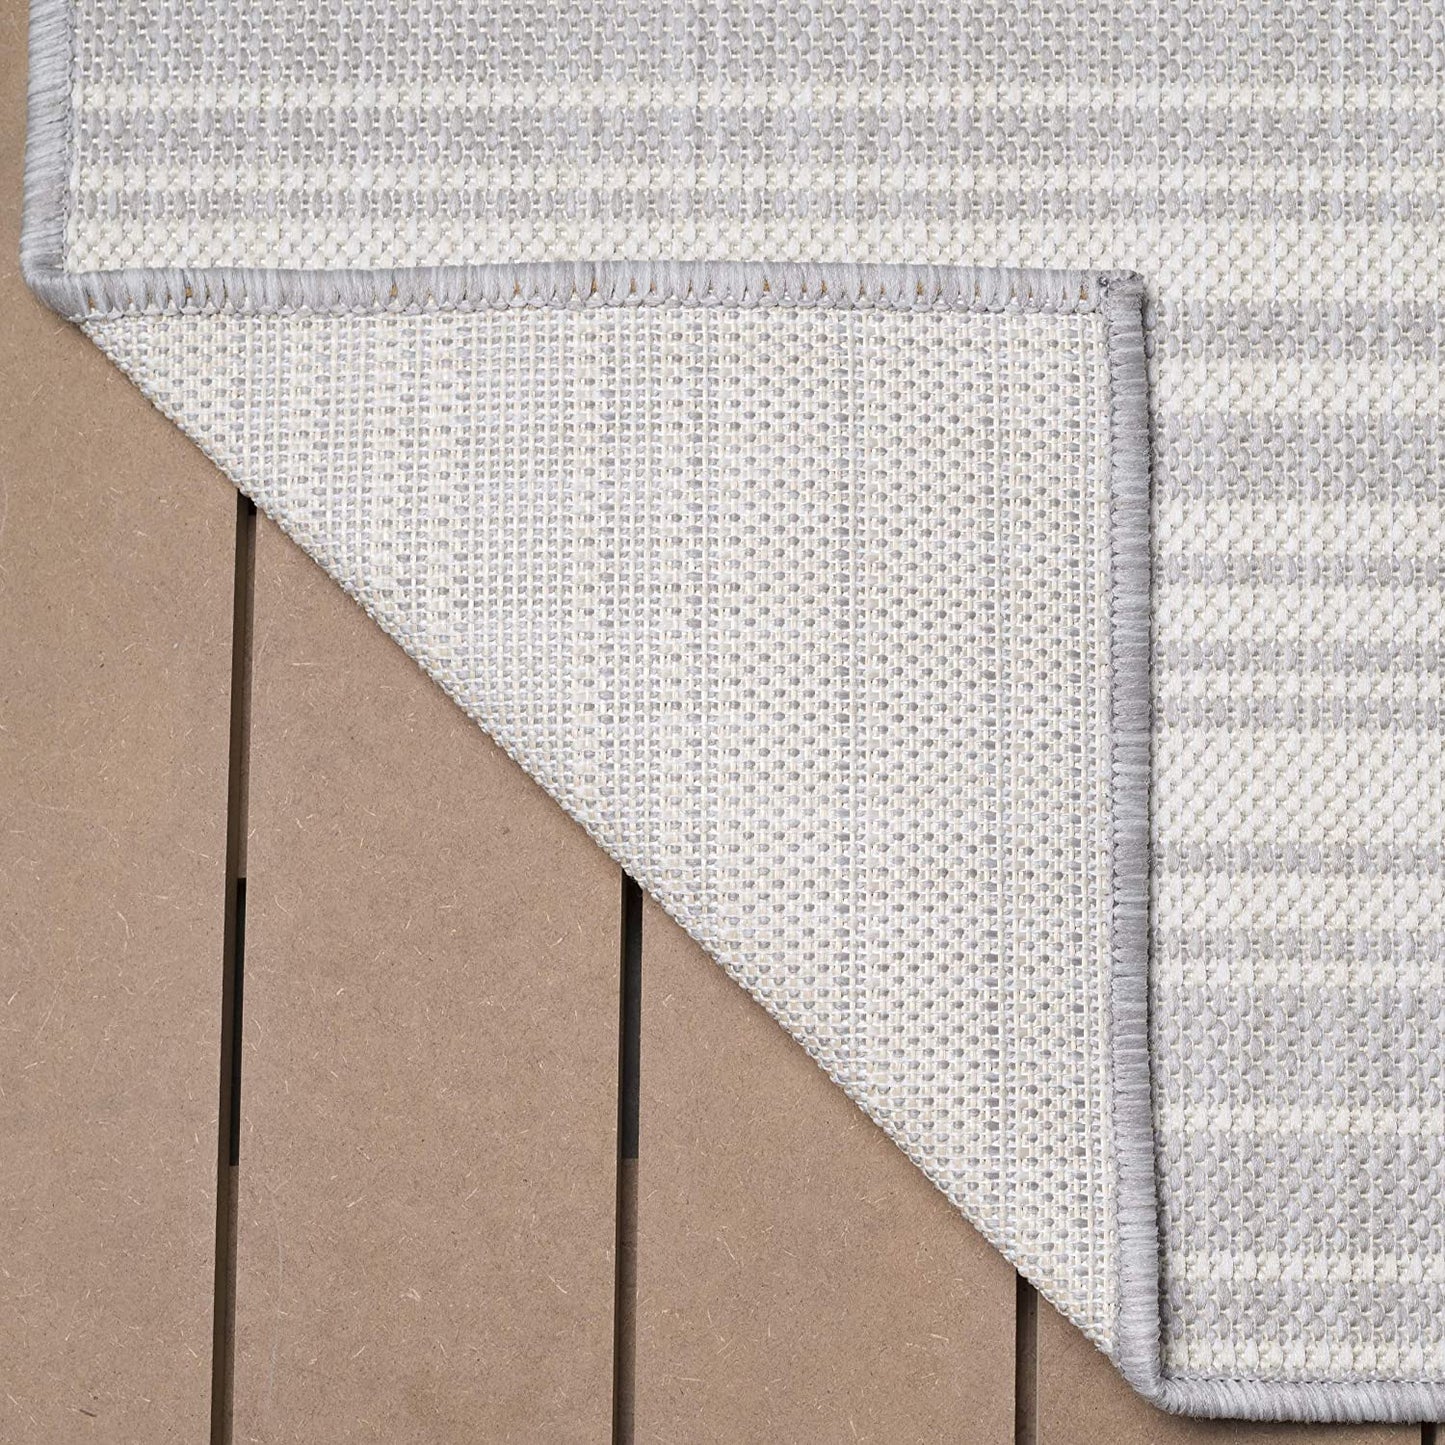 Modern Area Rugs for Indoor Outdoor Stripes Grey / White